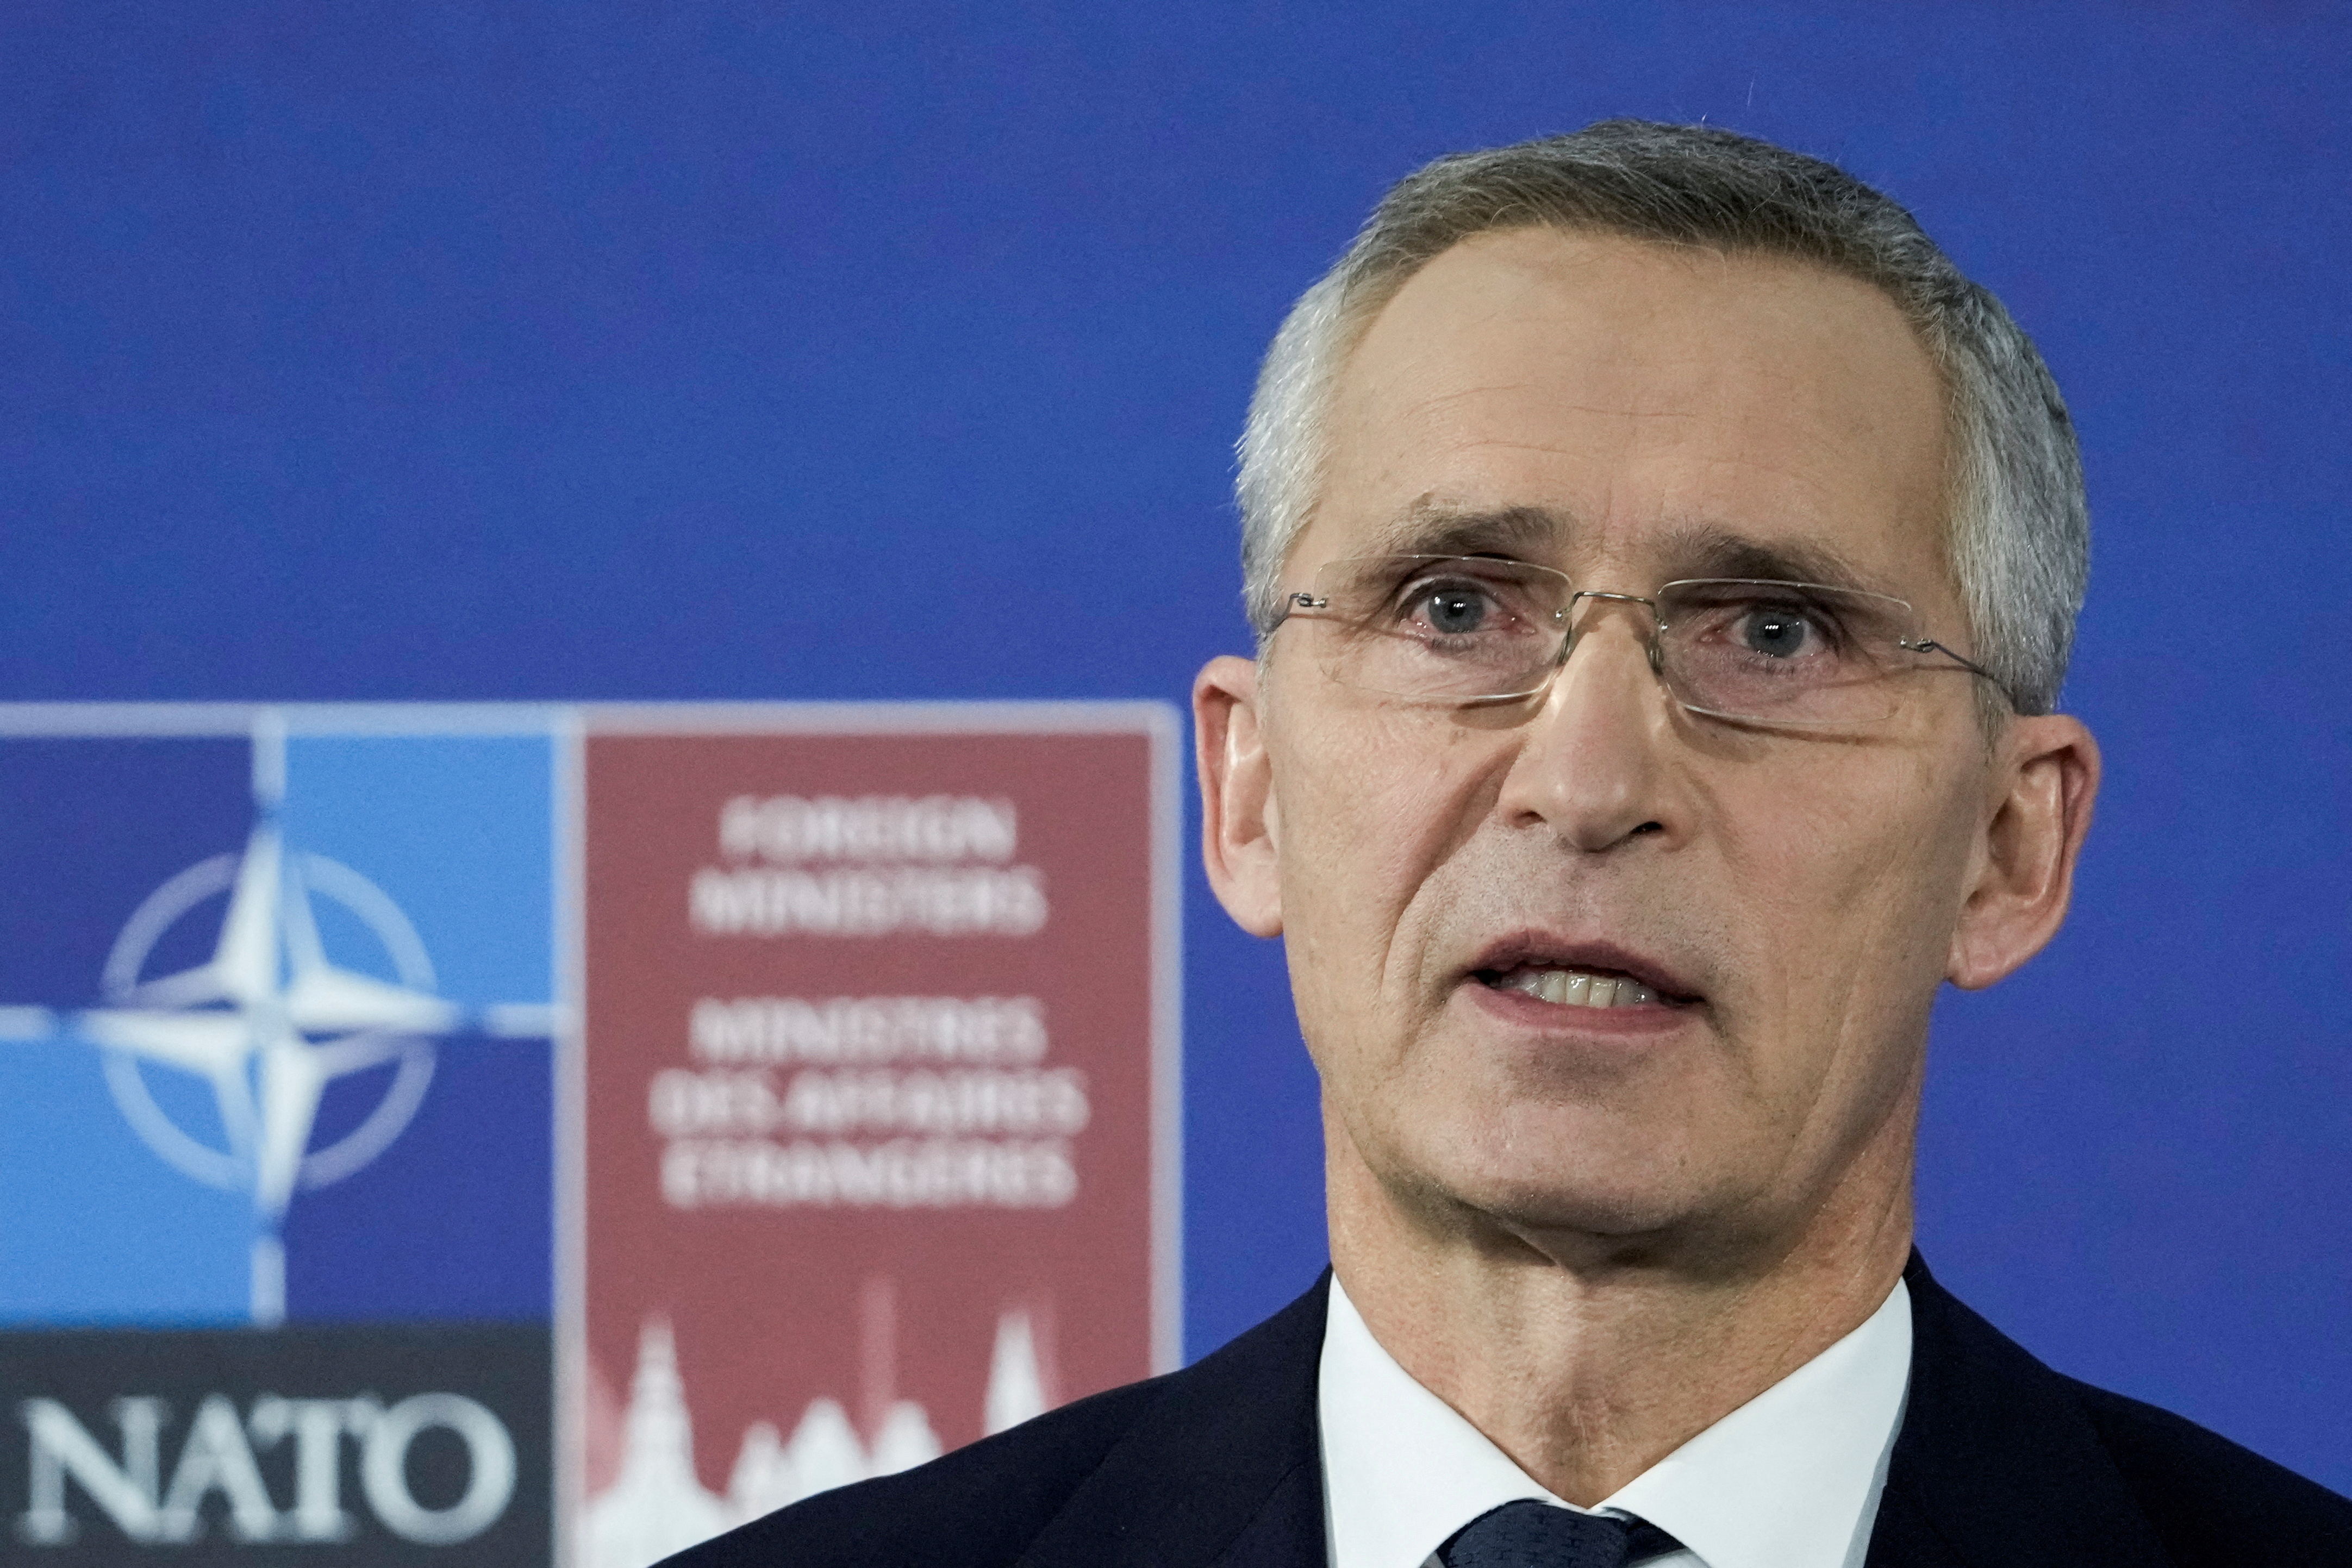 NATO Secretary General Jens Stoltenberg speaks during a news conference after the first day of a meeting of the Alliance's foreign ministers in Riga, Latvia November 30, 2021. REUTERS/Ints Kalnins/File Photo